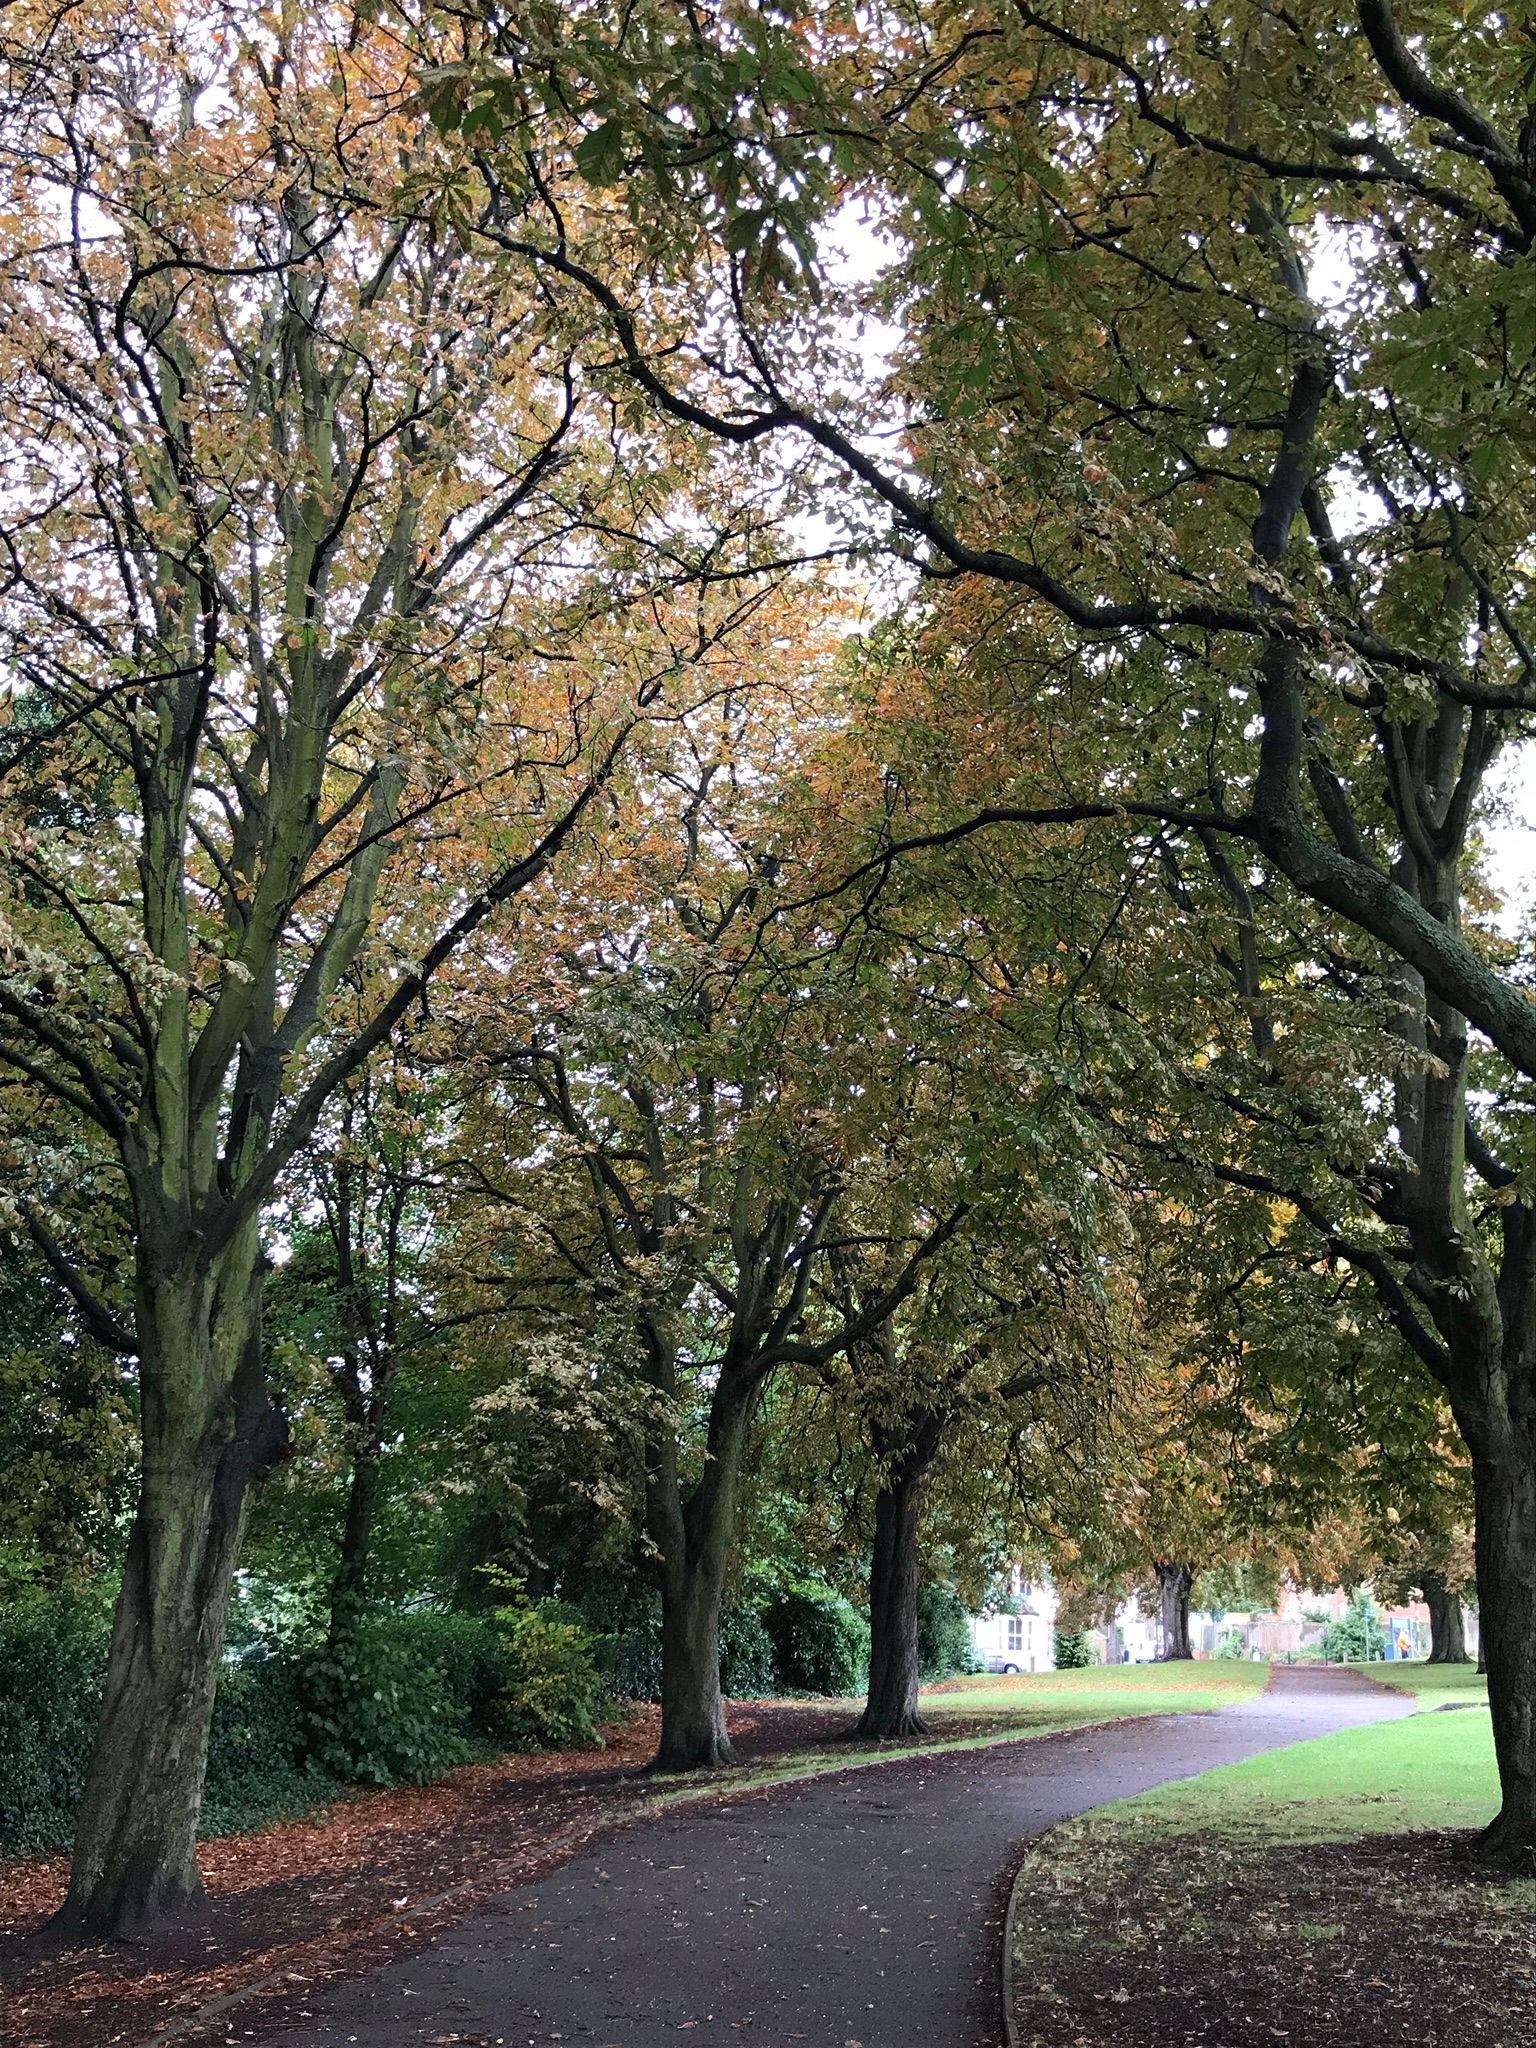 Horsechestnut trees lining the footpath to the play area